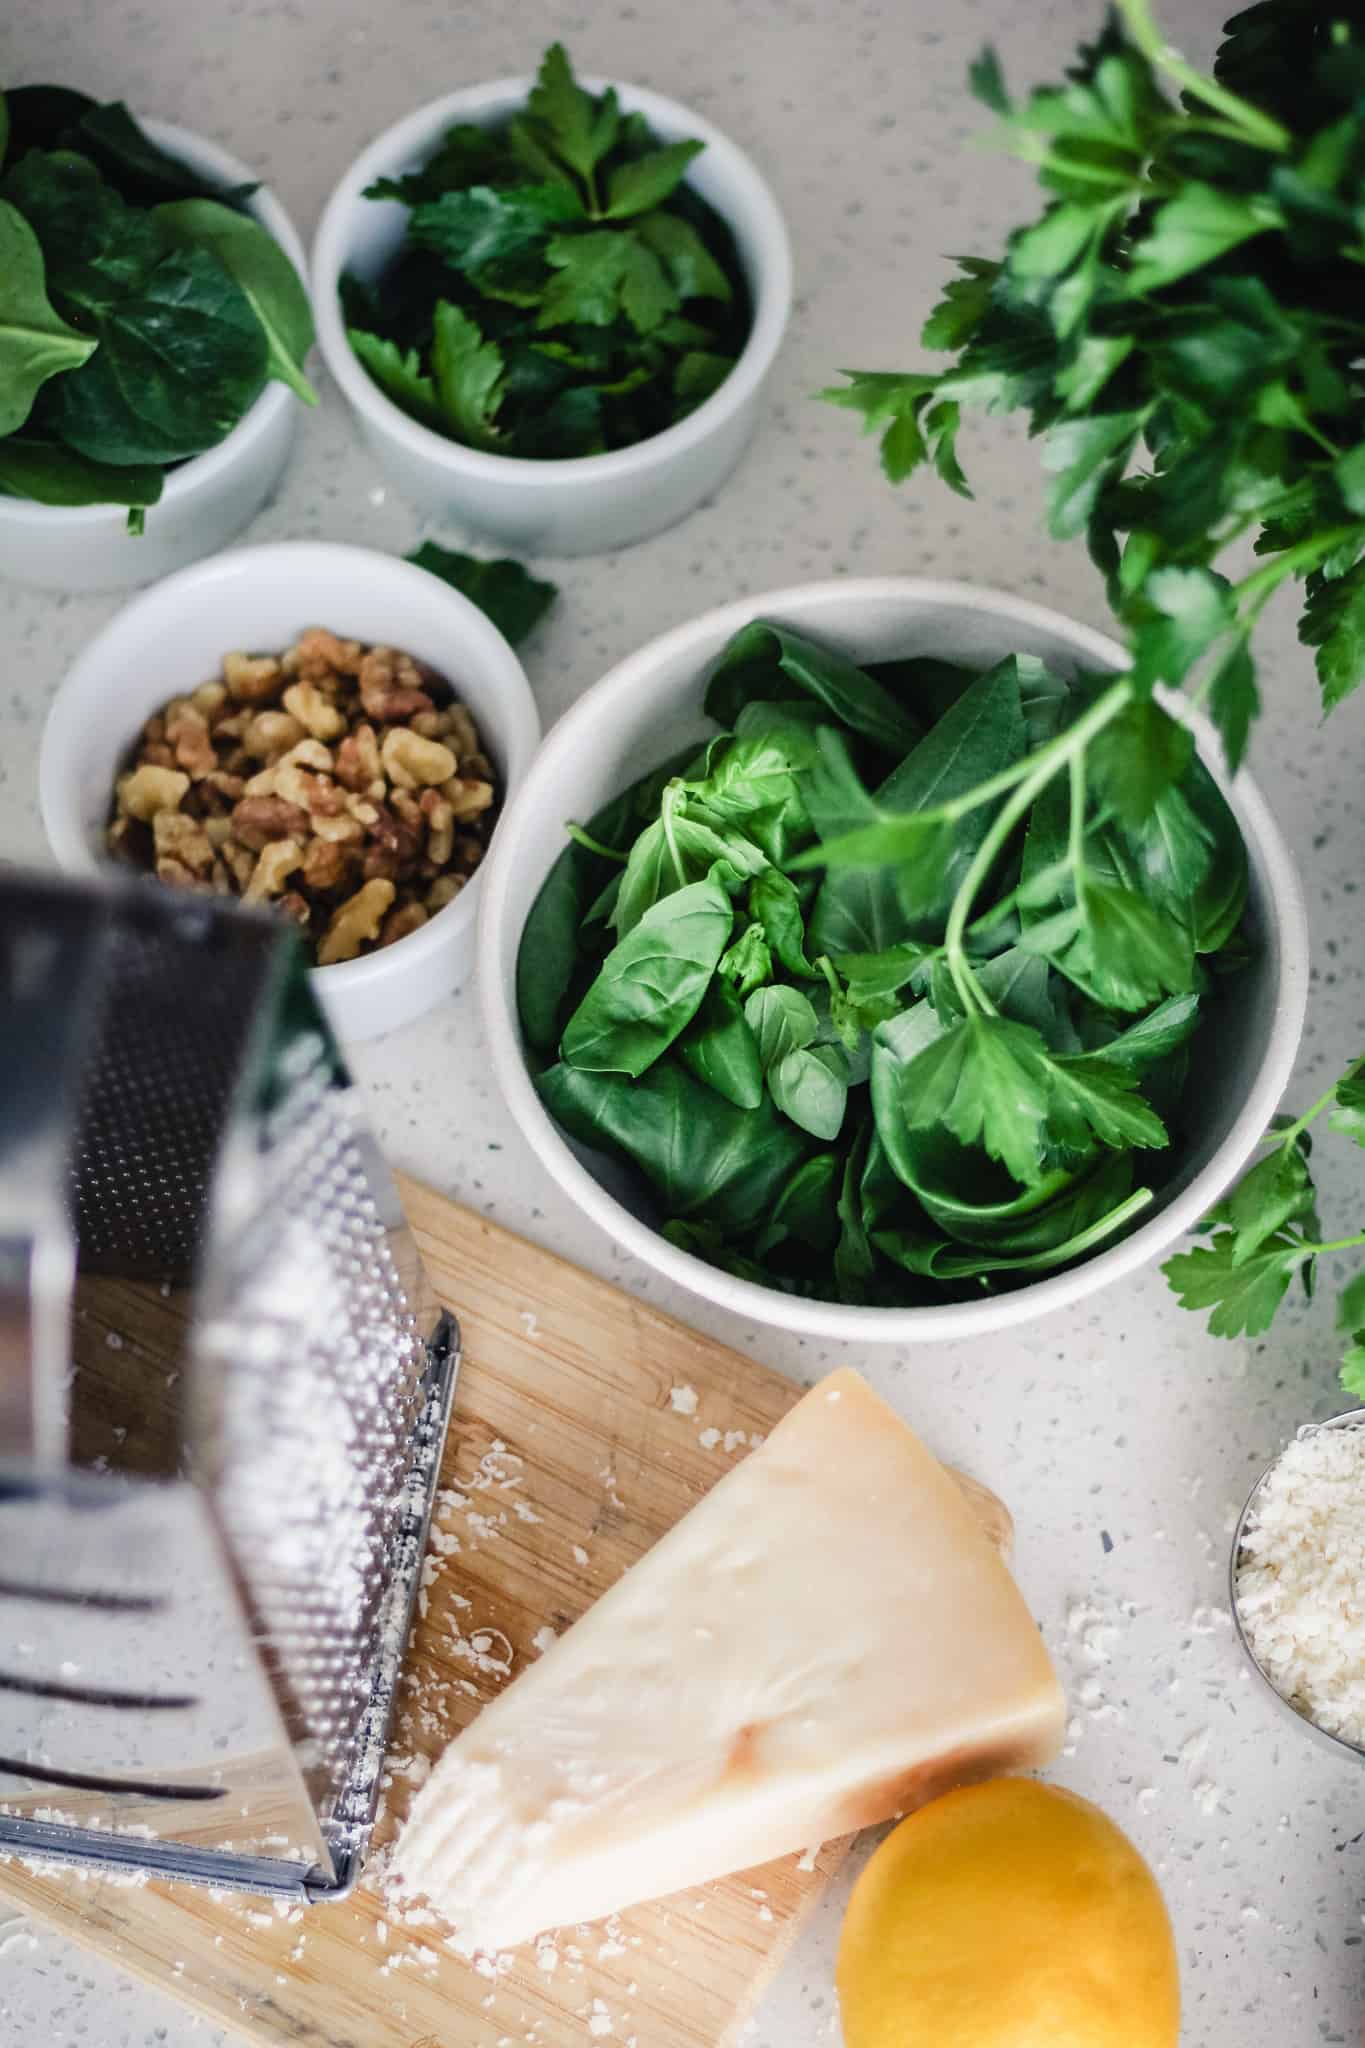 A wedge of Parmesan cheese on a cutting board with a grater next to lemon and bowls of basil, walnuts, spinach and parsley.